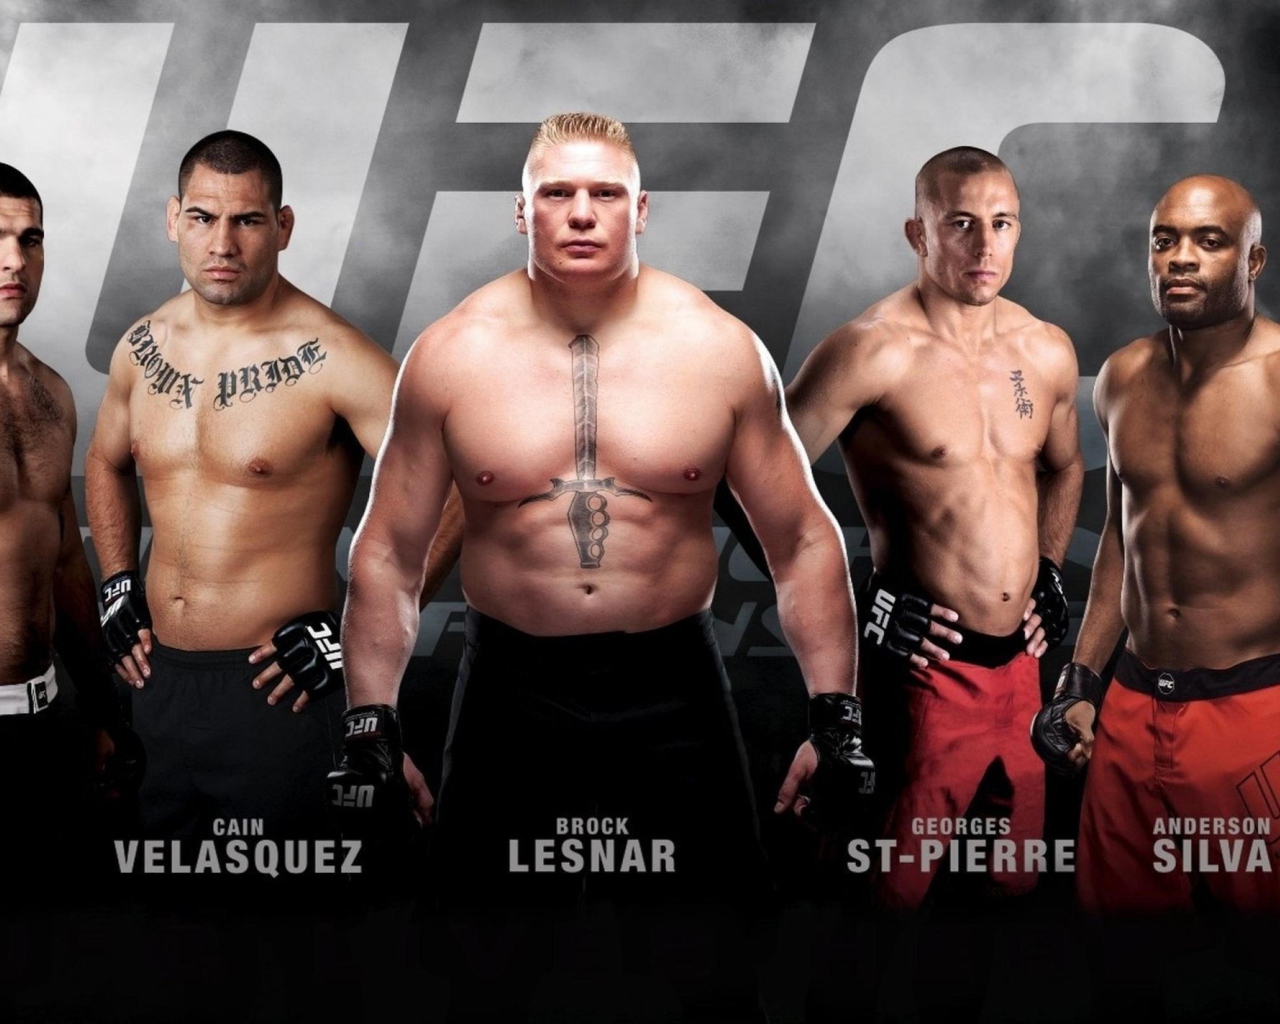 Ufc Mma Mixed Fighters wallpaper 1280x1024